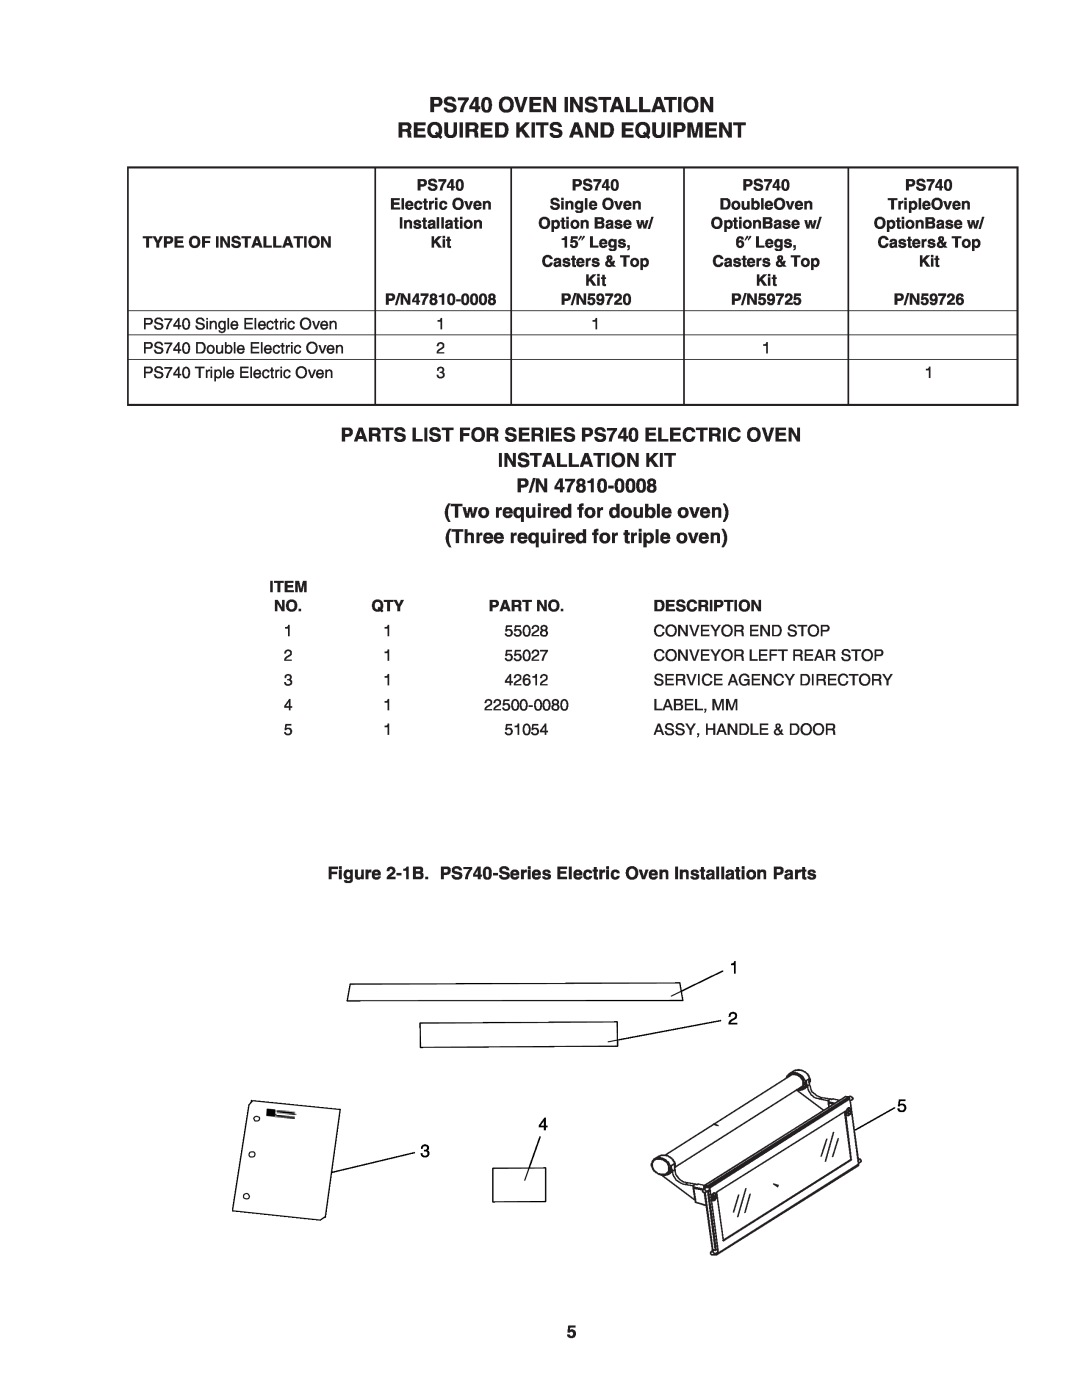 Middleby Marshall PS740E PS740 OVEN INSTALLATION REQUIRED KITS AND EQUIPMENT, Electric Oven, Single Oven, DoubleOven 